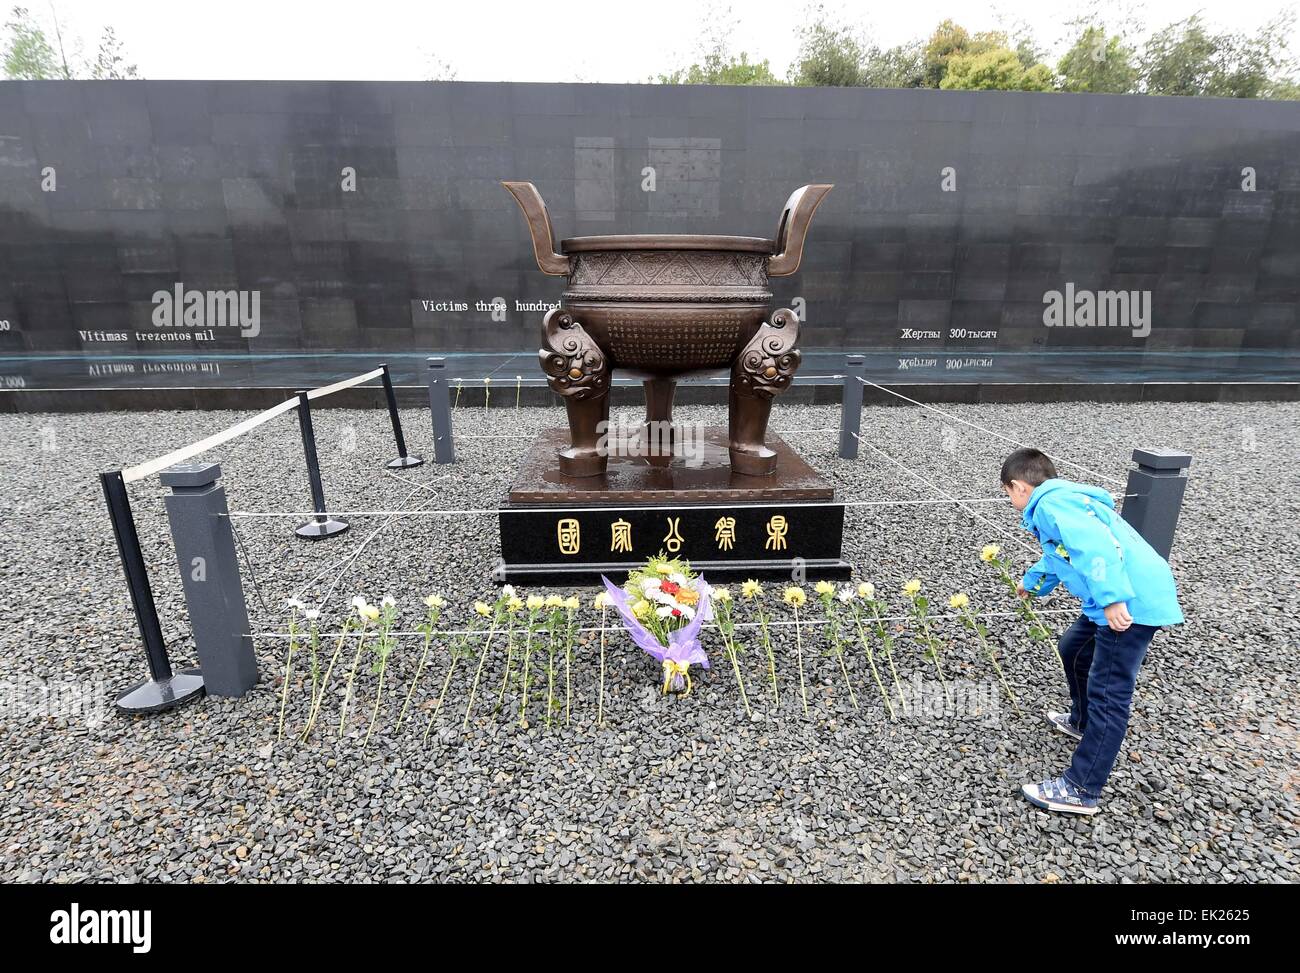 Nanjing, China's Jiangsu Province. 5th Apr, 2015. A resident lays a flower as she mourns the Nanjing Massacre victims at the Memorial Hall of the Victims in Nanjing Massacre by Japanese Invaders on the Qingming Festival in Nanjing, capital of east China's Jiangsu Province, April 5, 2015. Japanese troops captured Nanjing, then China's capital, on Dec. 13 of 1937 and started a 40-odd-day slaughter. More than 300,000 Chinese soldiers who had laid down their arms and civilians were murdered, and over 20,000 women were raped. © Sun Can/Xinhua/Alamy Live News Stock Photo